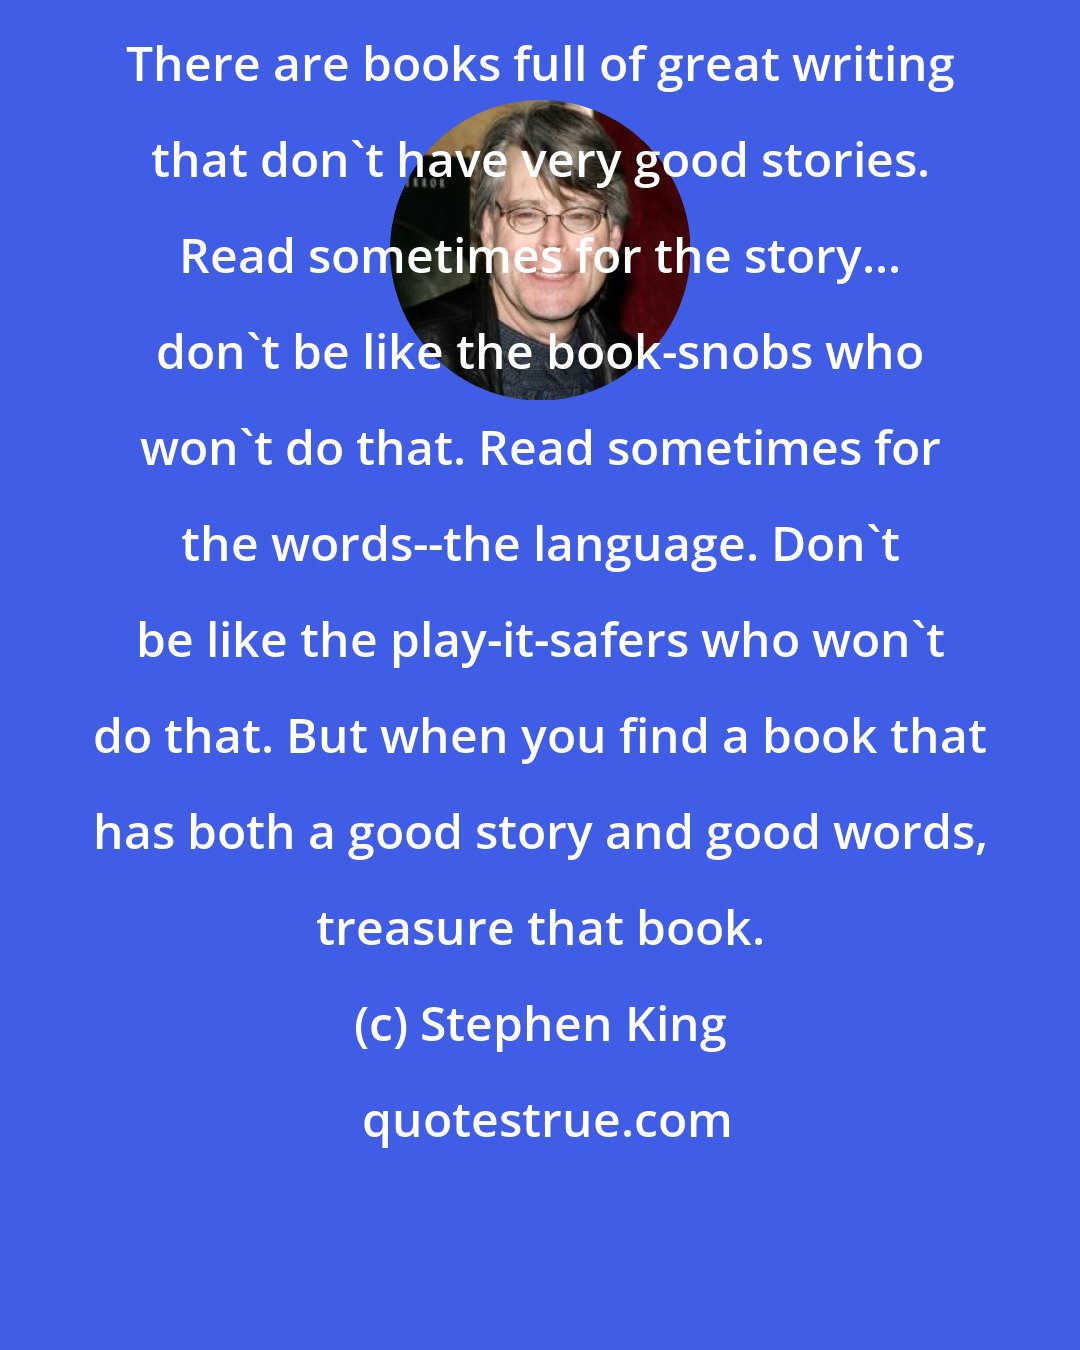 Stephen King: There are books full of great writing that don't have very good stories. Read sometimes for the story... don't be like the book-snobs who won't do that. Read sometimes for the words--the language. Don't be like the play-it-safers who won't do that. But when you find a book that has both a good story and good words, treasure that book.